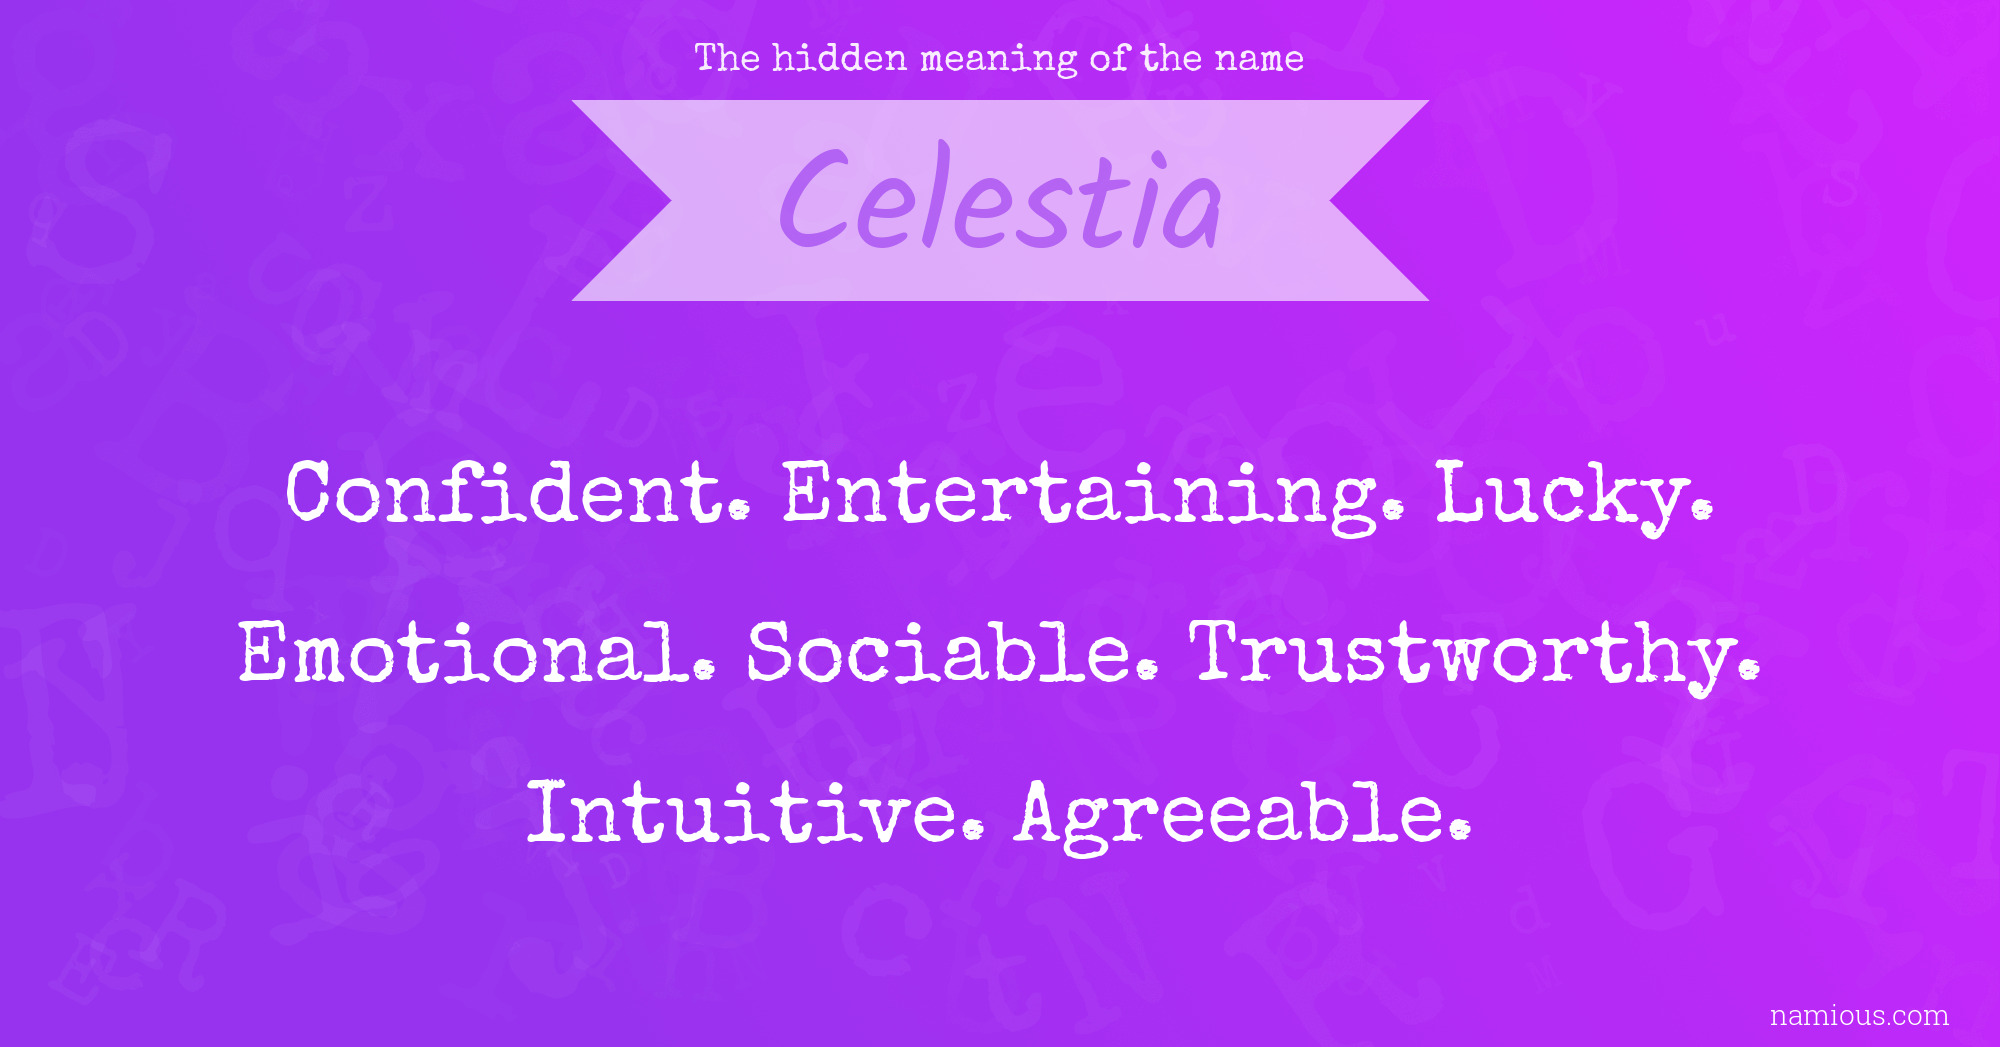 The hidden meaning of the name Celestia